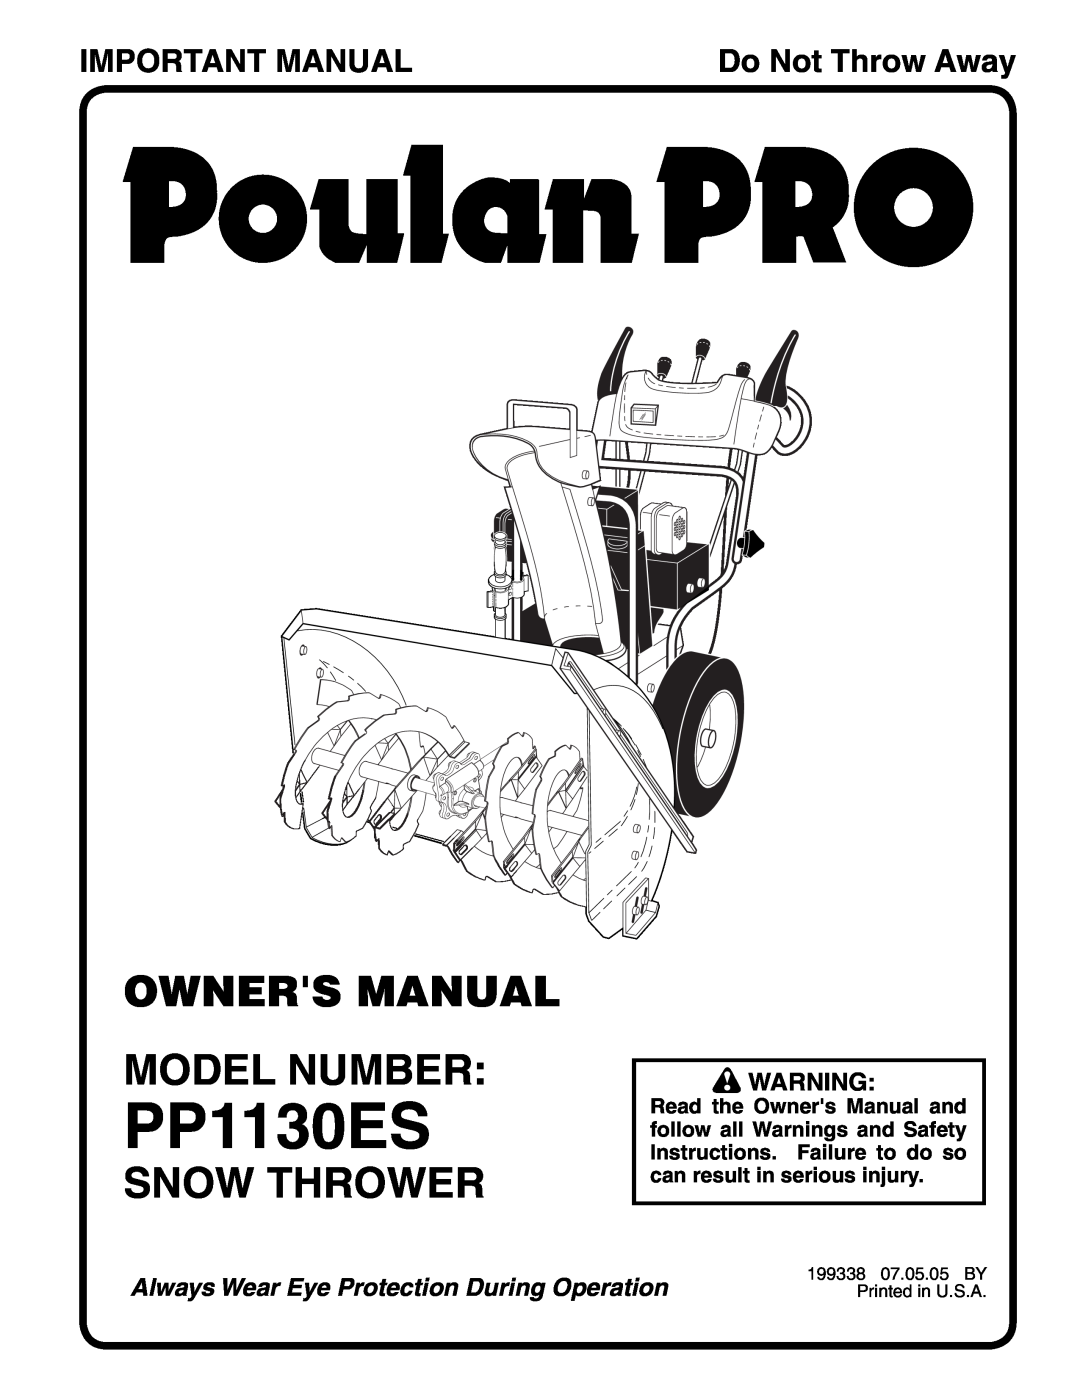 Poulan PP1130ES owner manual Snow Thrower, Important Manual, Do Not Throw Away 